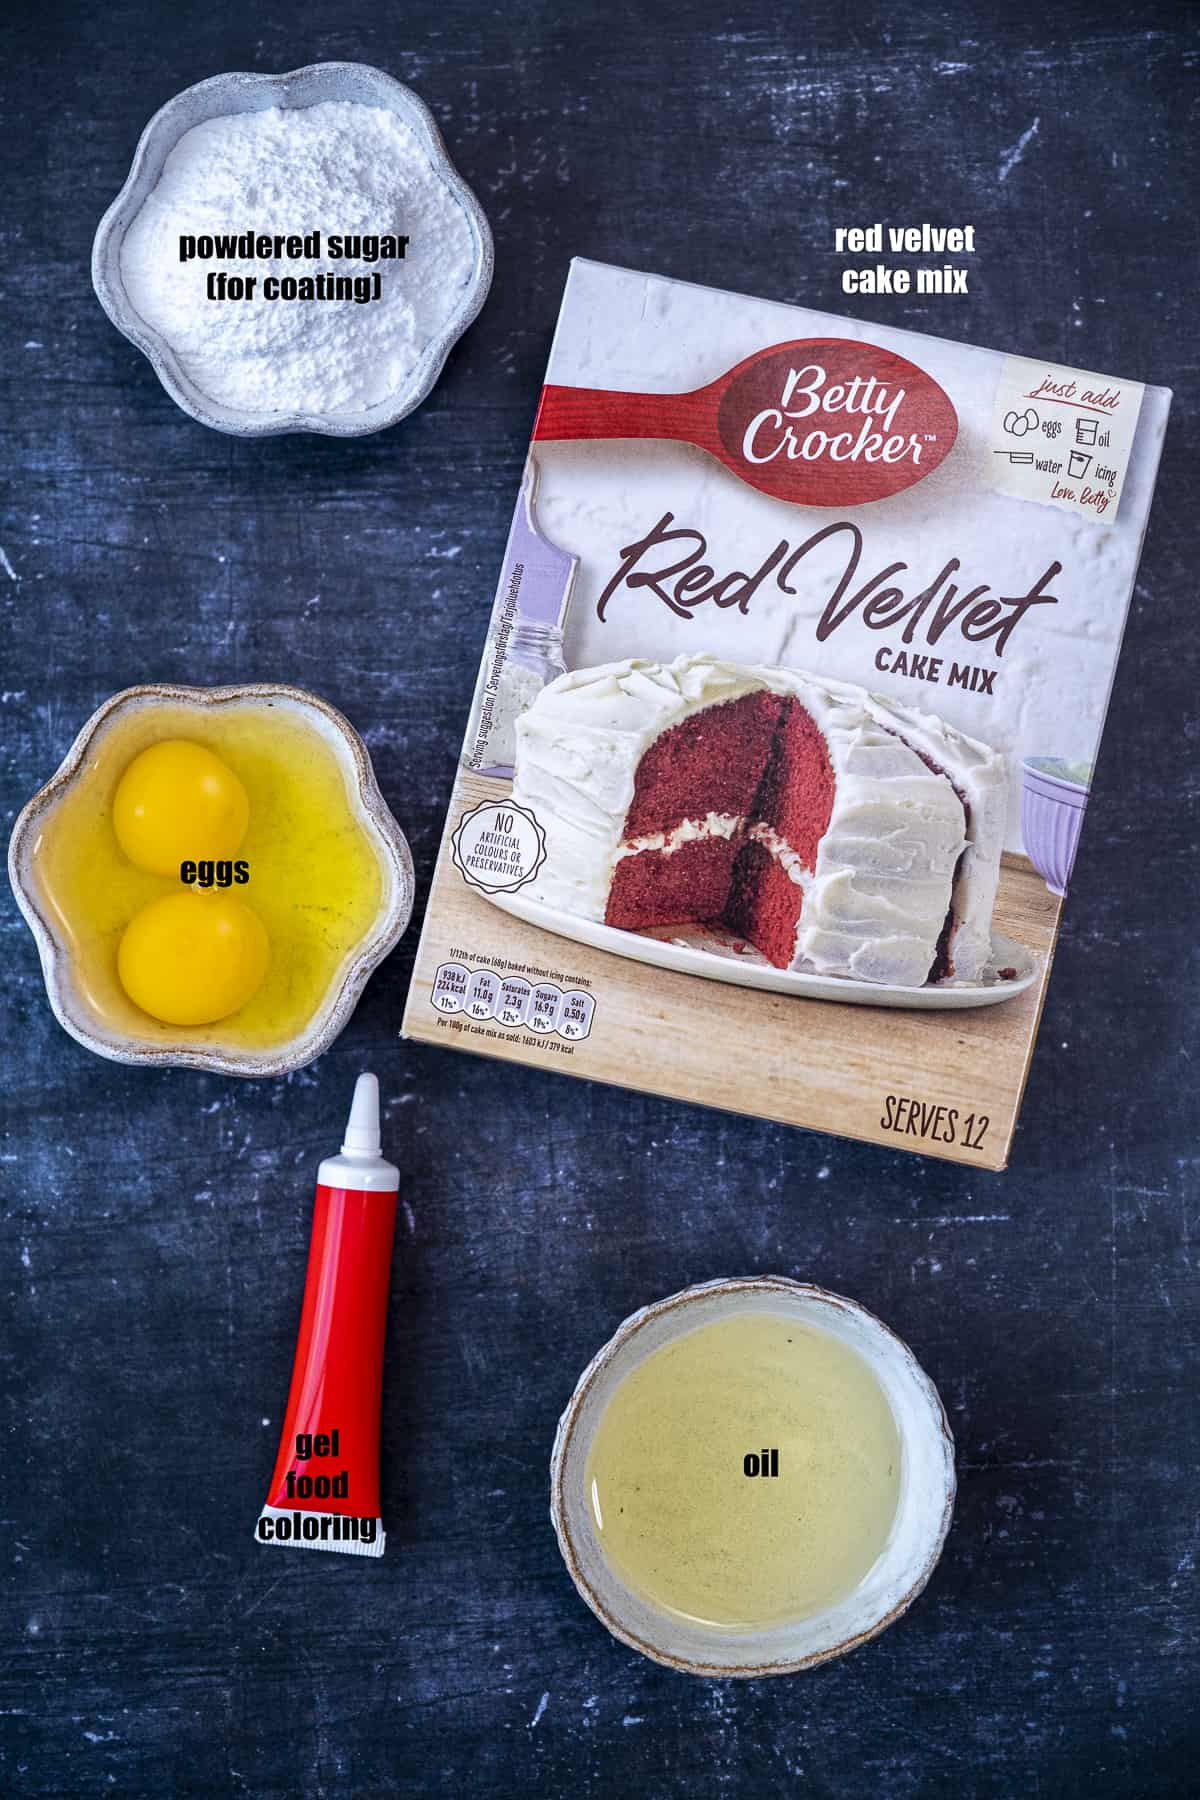 A box of red velvet cake mix, eggs, powdered sugar, oil and a tube of red food coloring on a dark background.